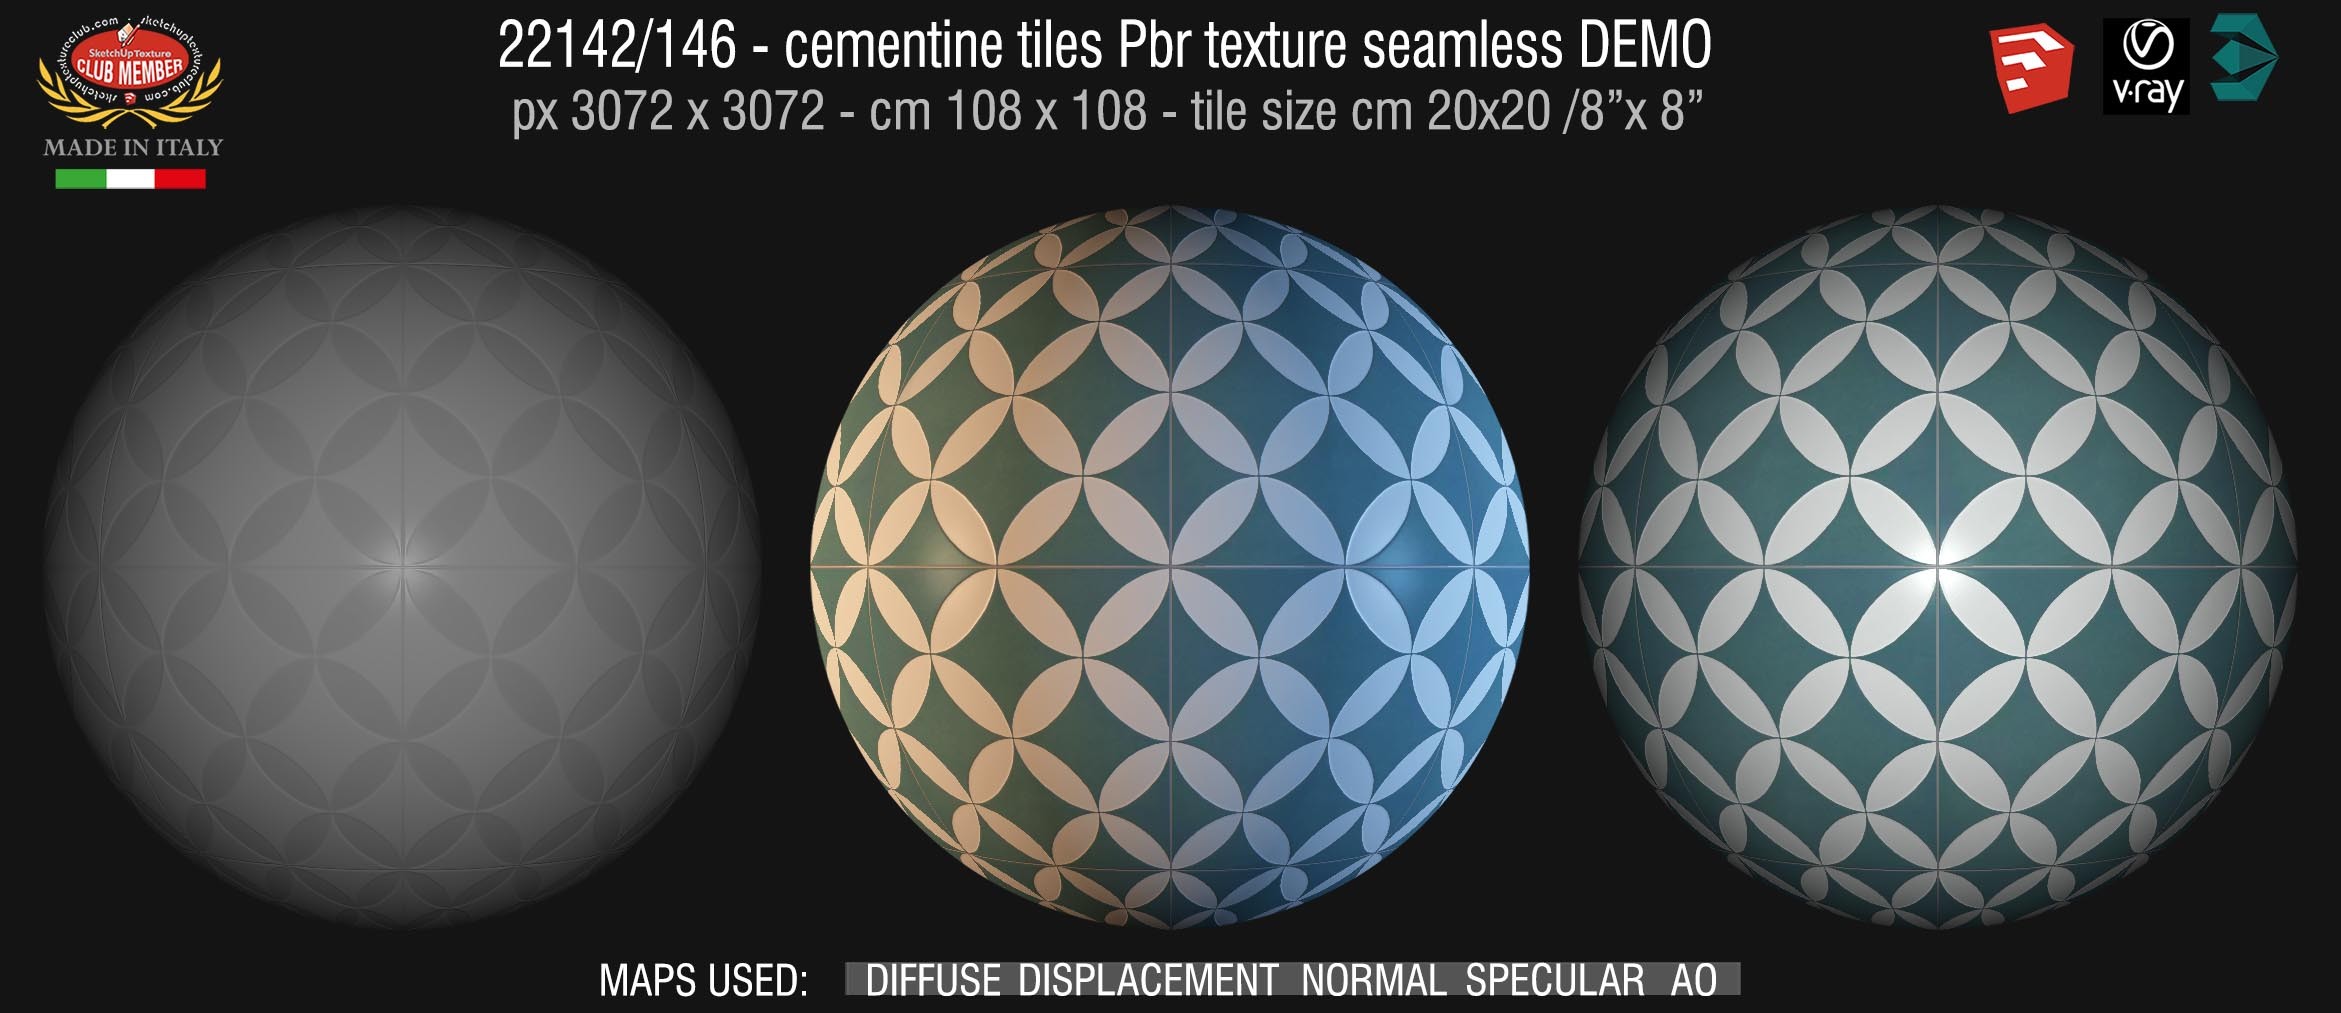 22142/146 cementine tiles Pbr texture seamless DEMO - Contrasti collection Tappeto 13 by RAGNO